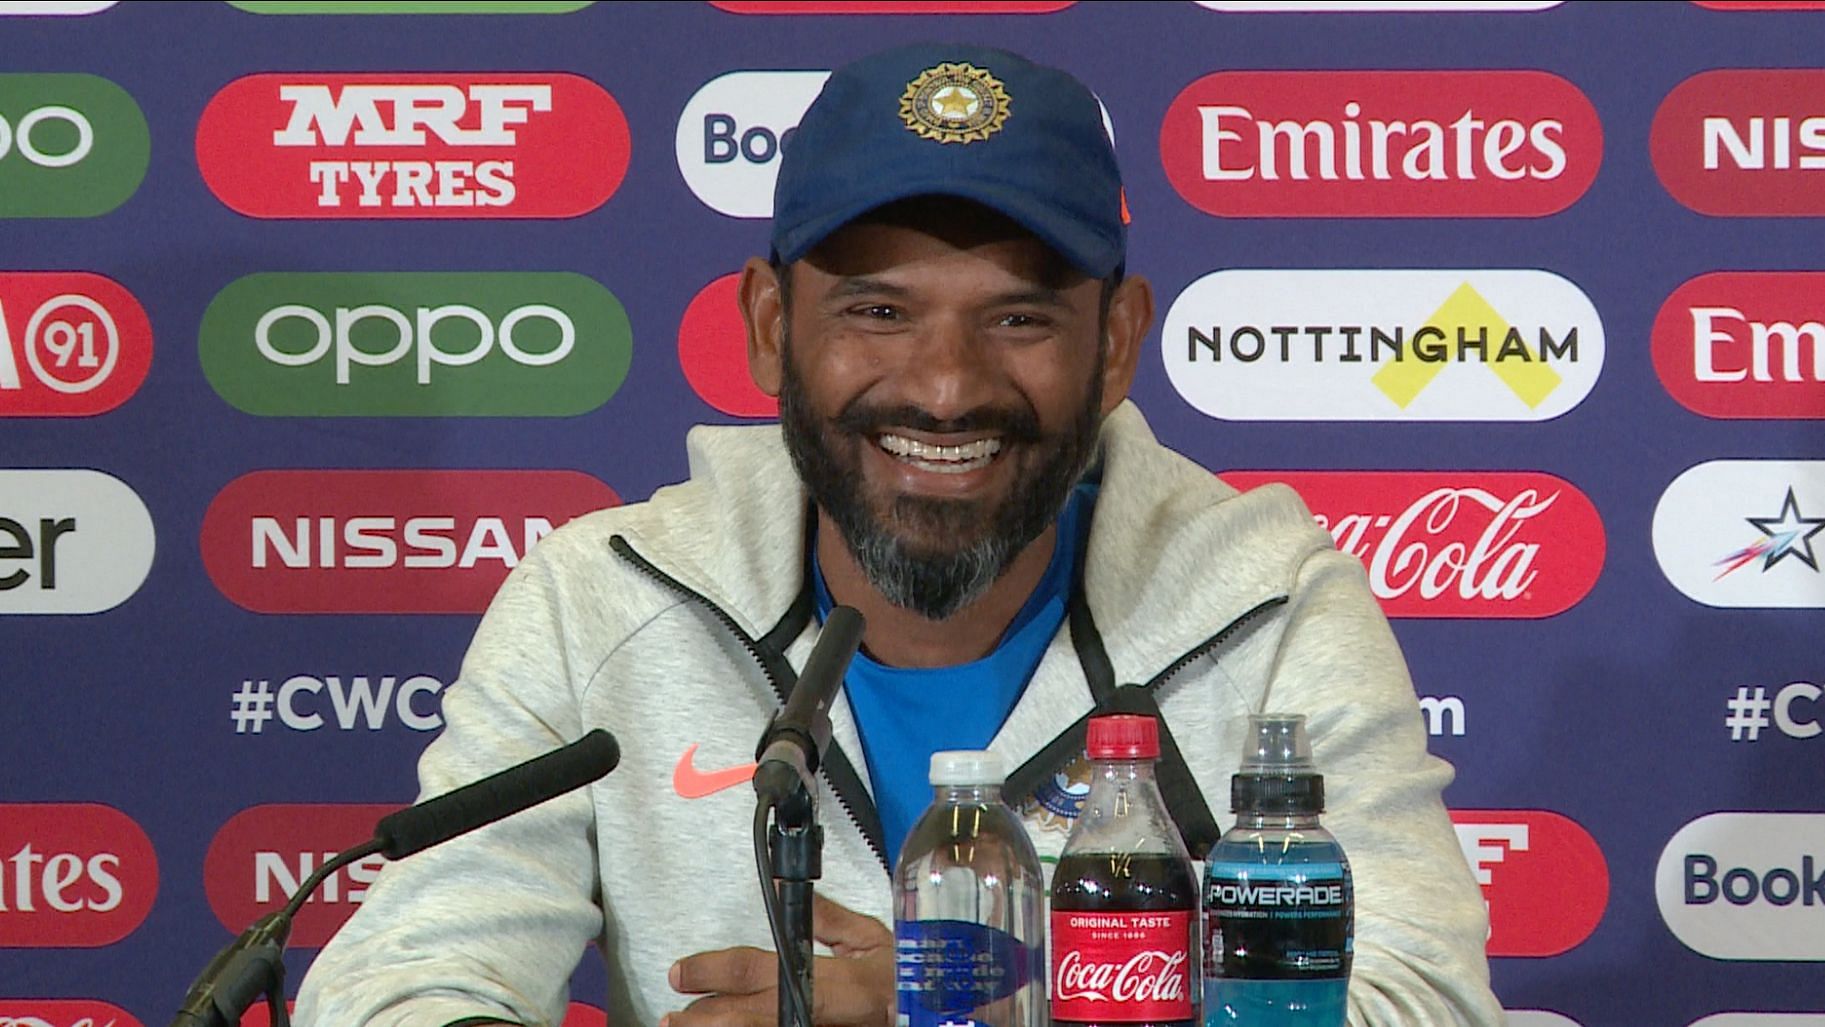 India’s fielding coach R Sridhar said the team management keeps a sharp eye on the workloads and practice schedules of all players